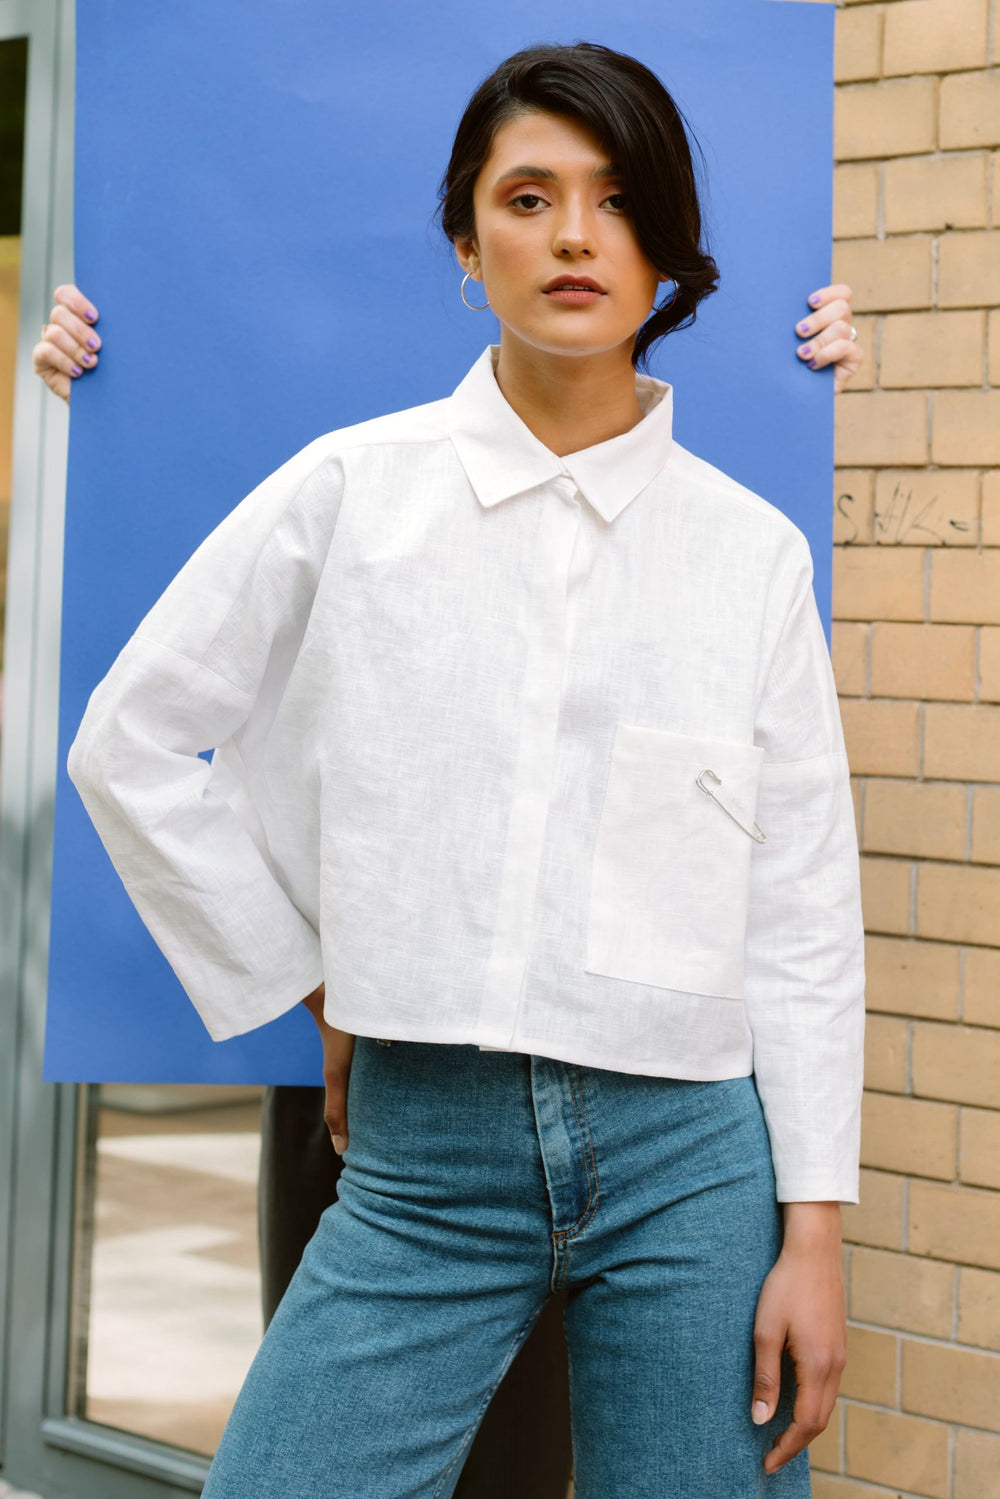 Woman wearing the Noella Blouse sewing pattern from JULIANA MARTEJEVS on The Fold Line. A shirt pattern made in cotton poplin fabrics, featuring an oversized, cropped silhouette, long sleeves, single front pocket, stand collar, back yoke with inverted ple